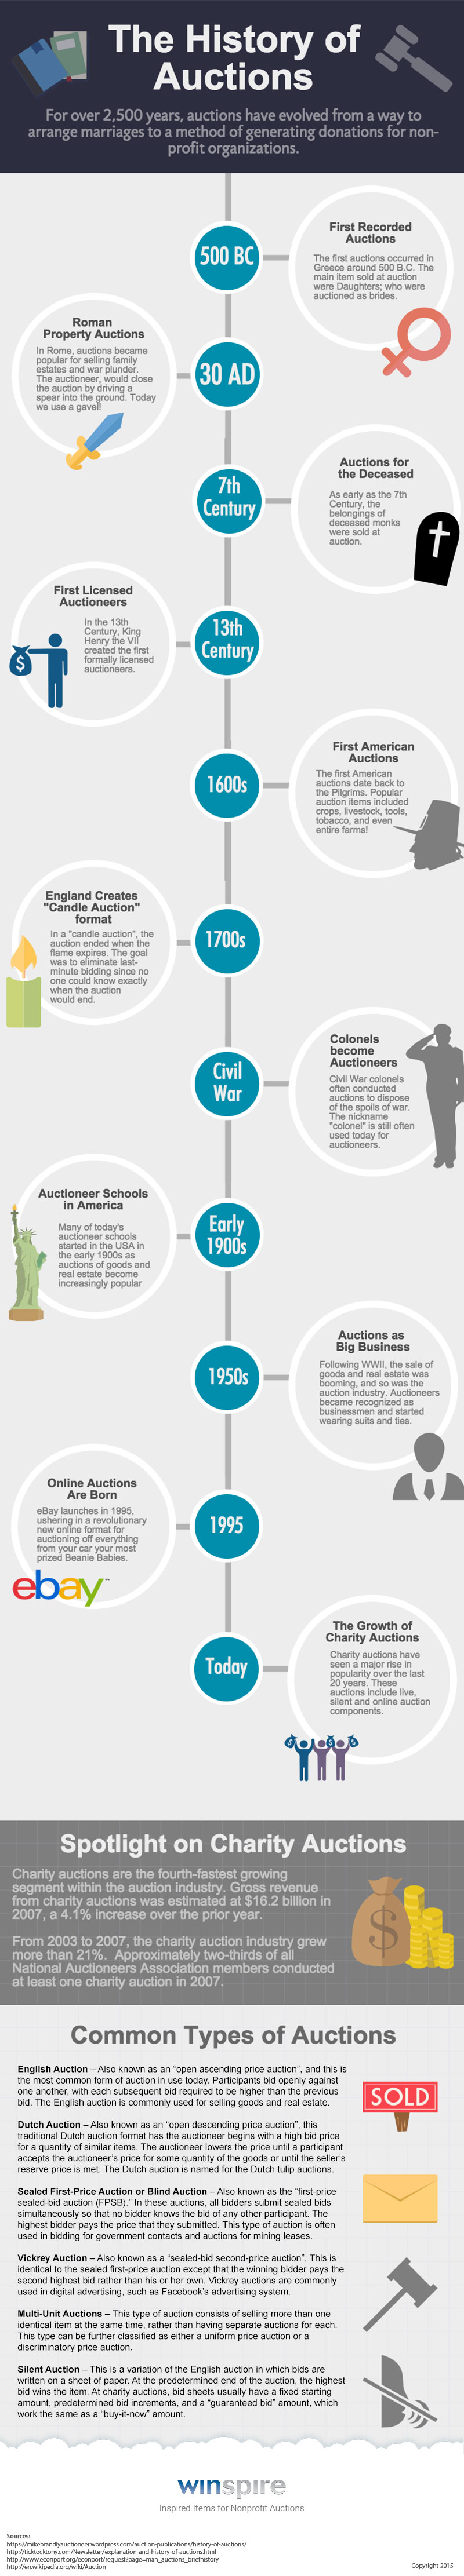 winspire-history-of-auctions-infographic-2